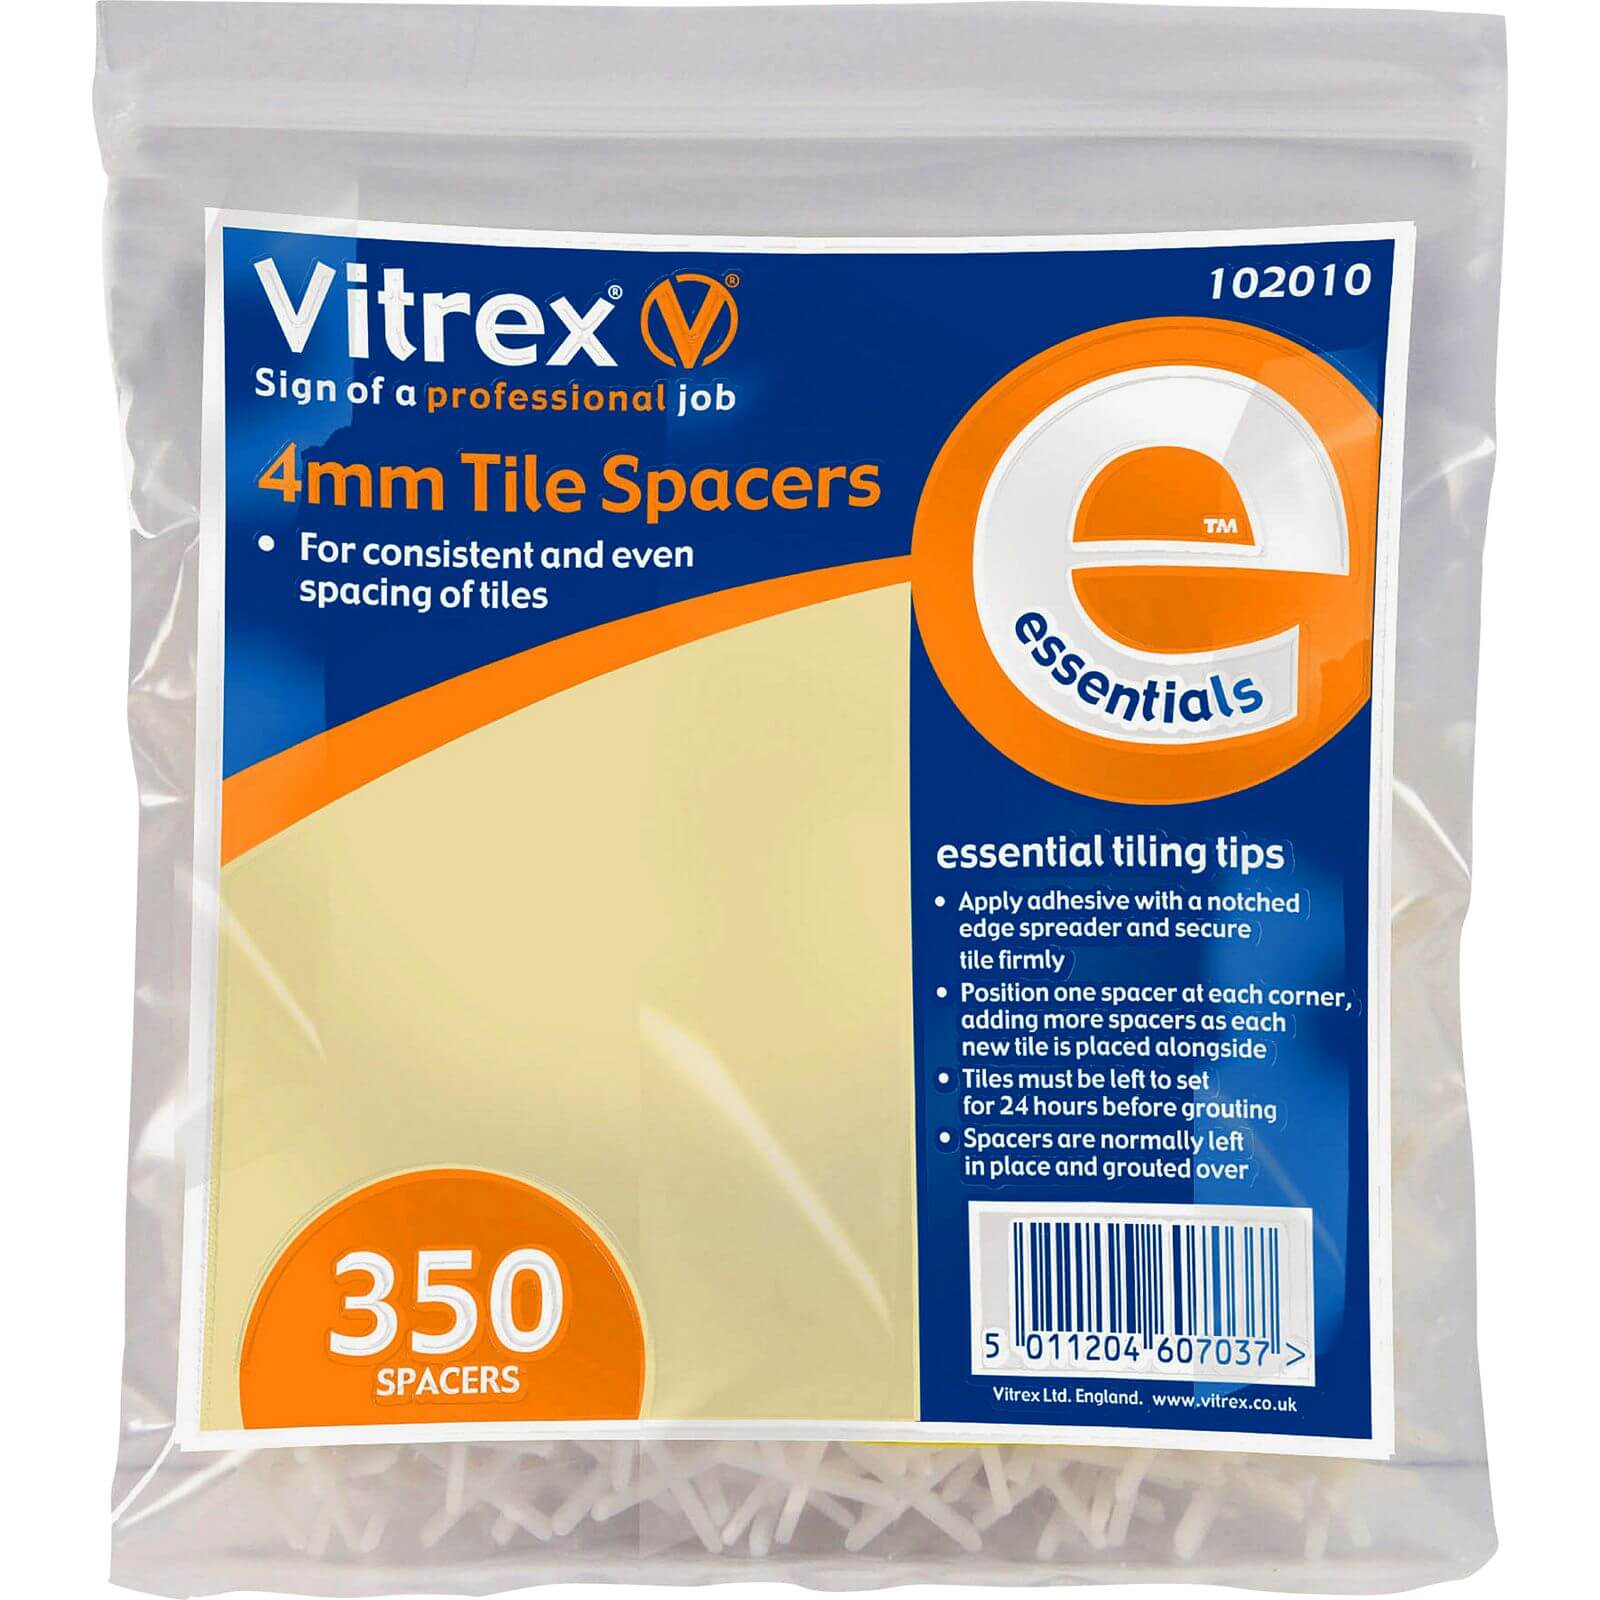 Photo of Vitrex Tile Spacers - 350x4mm